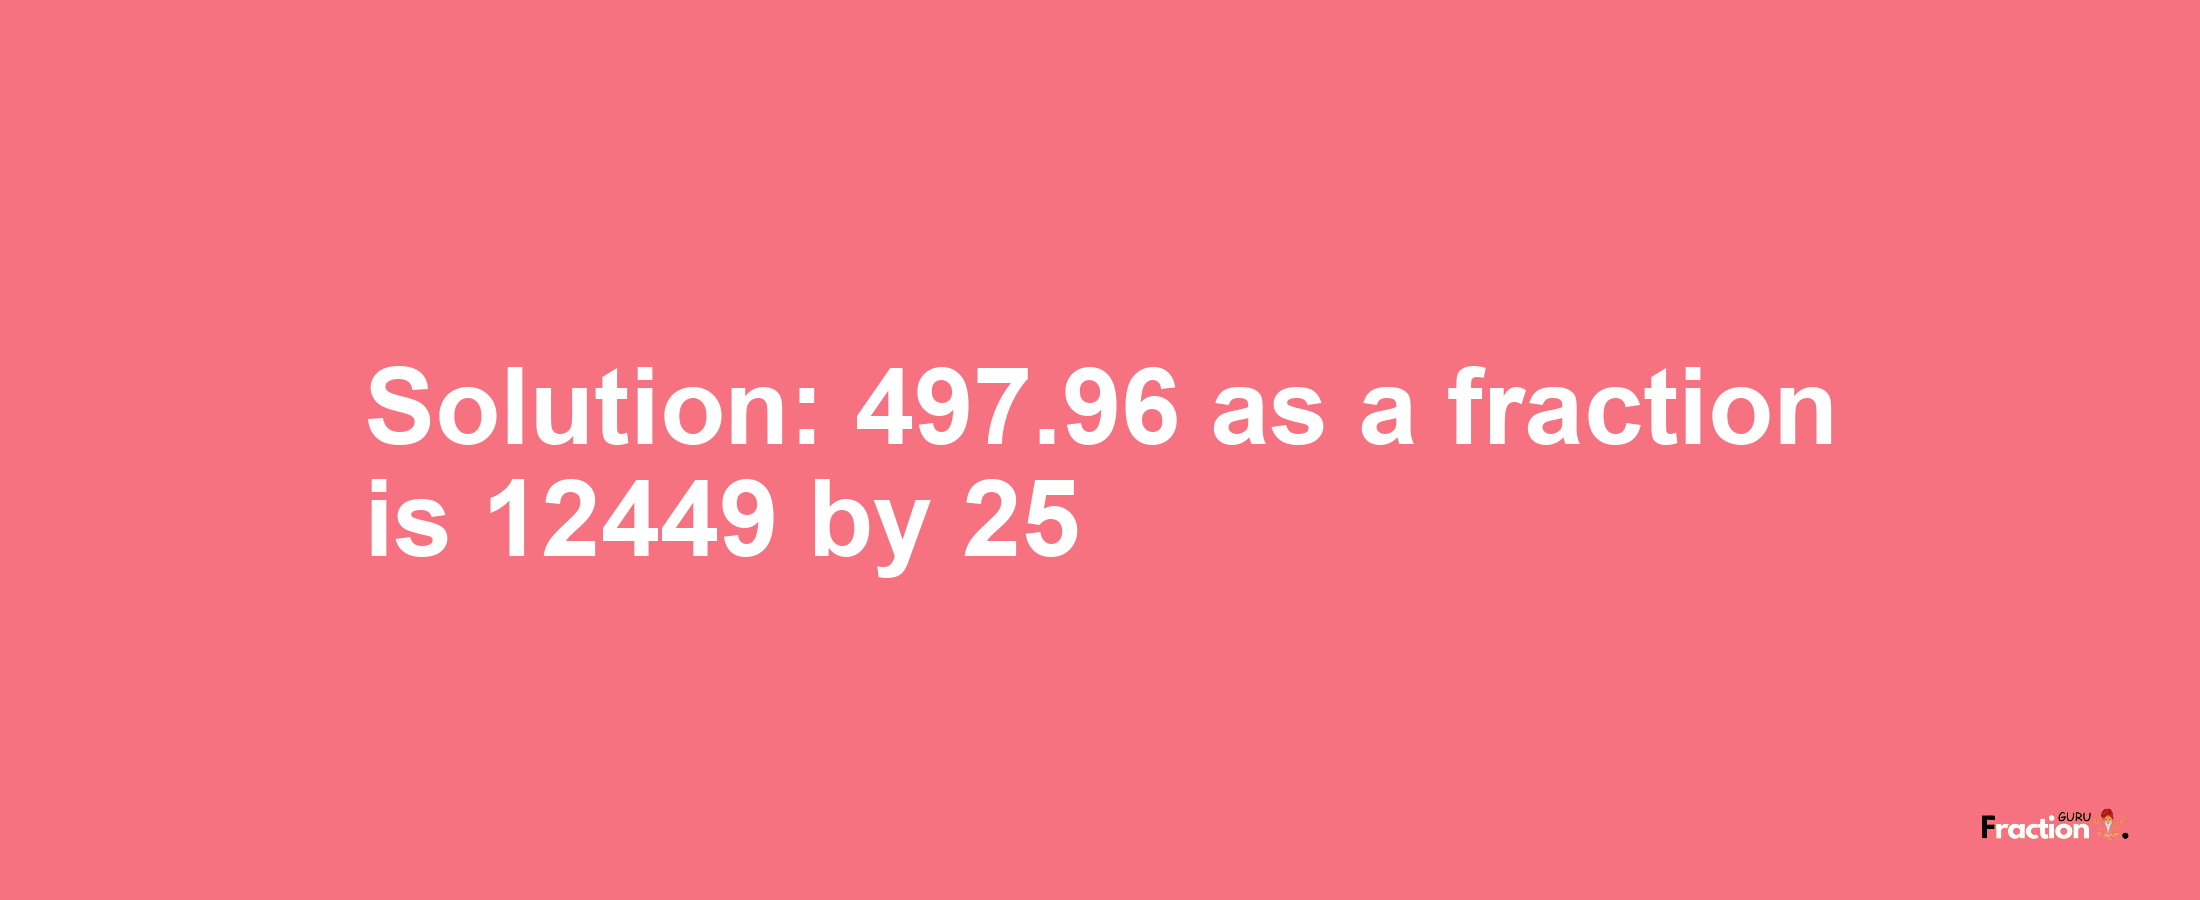 Solution:497.96 as a fraction is 12449/25